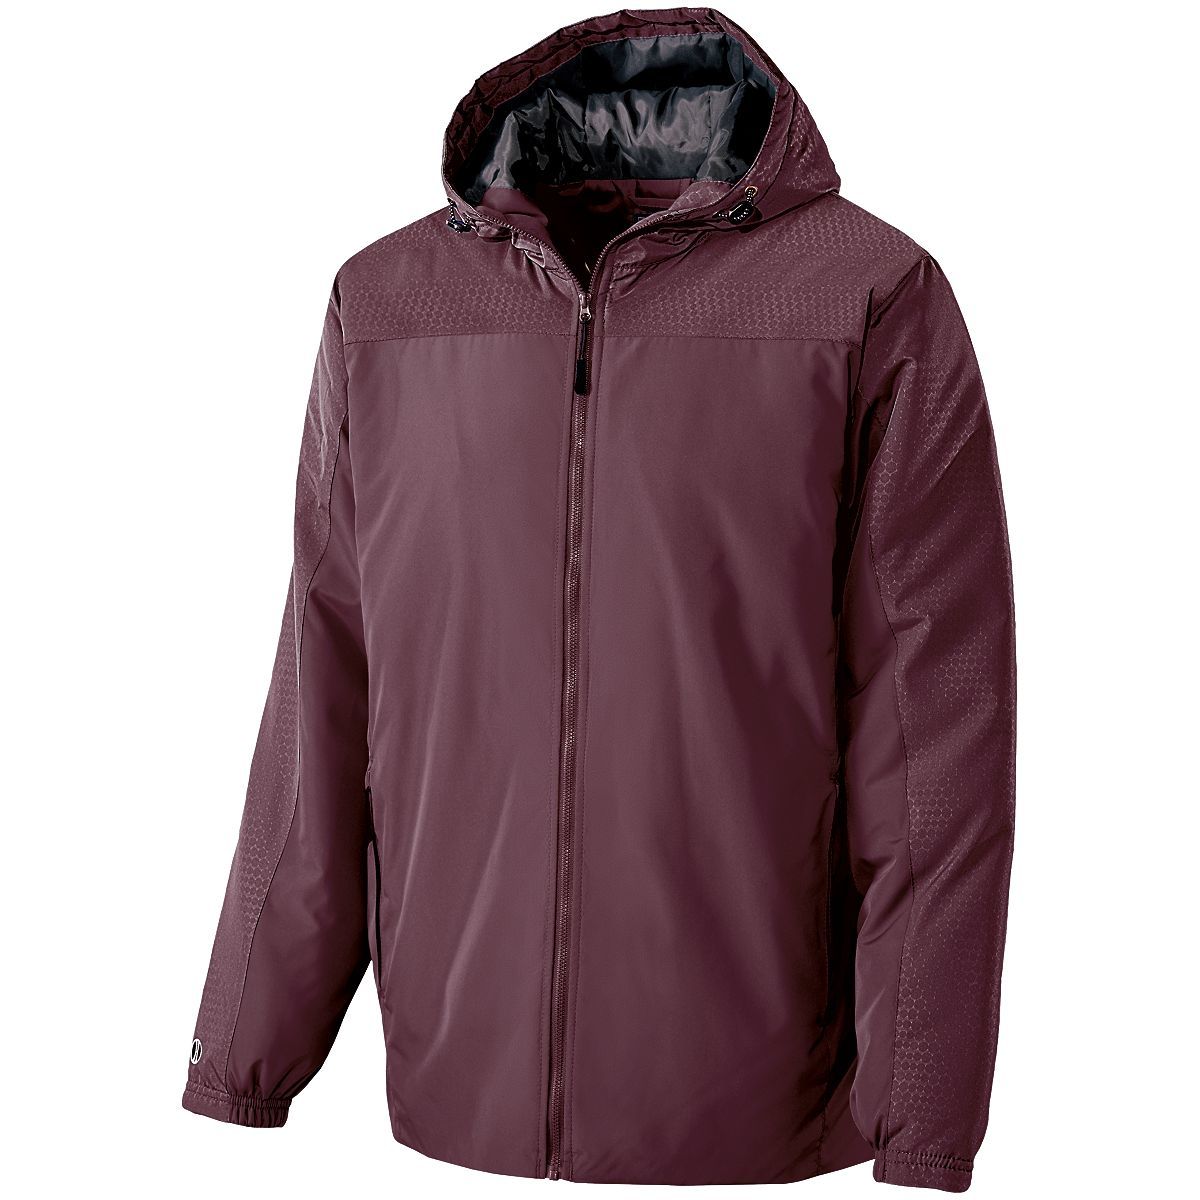 Holloway Youth Bionic Hooded Jacket in Maroon/Carbon  -Part of the Youth, Youth-Jacket, Holloway, Outerwear product lines at KanaleyCreations.com